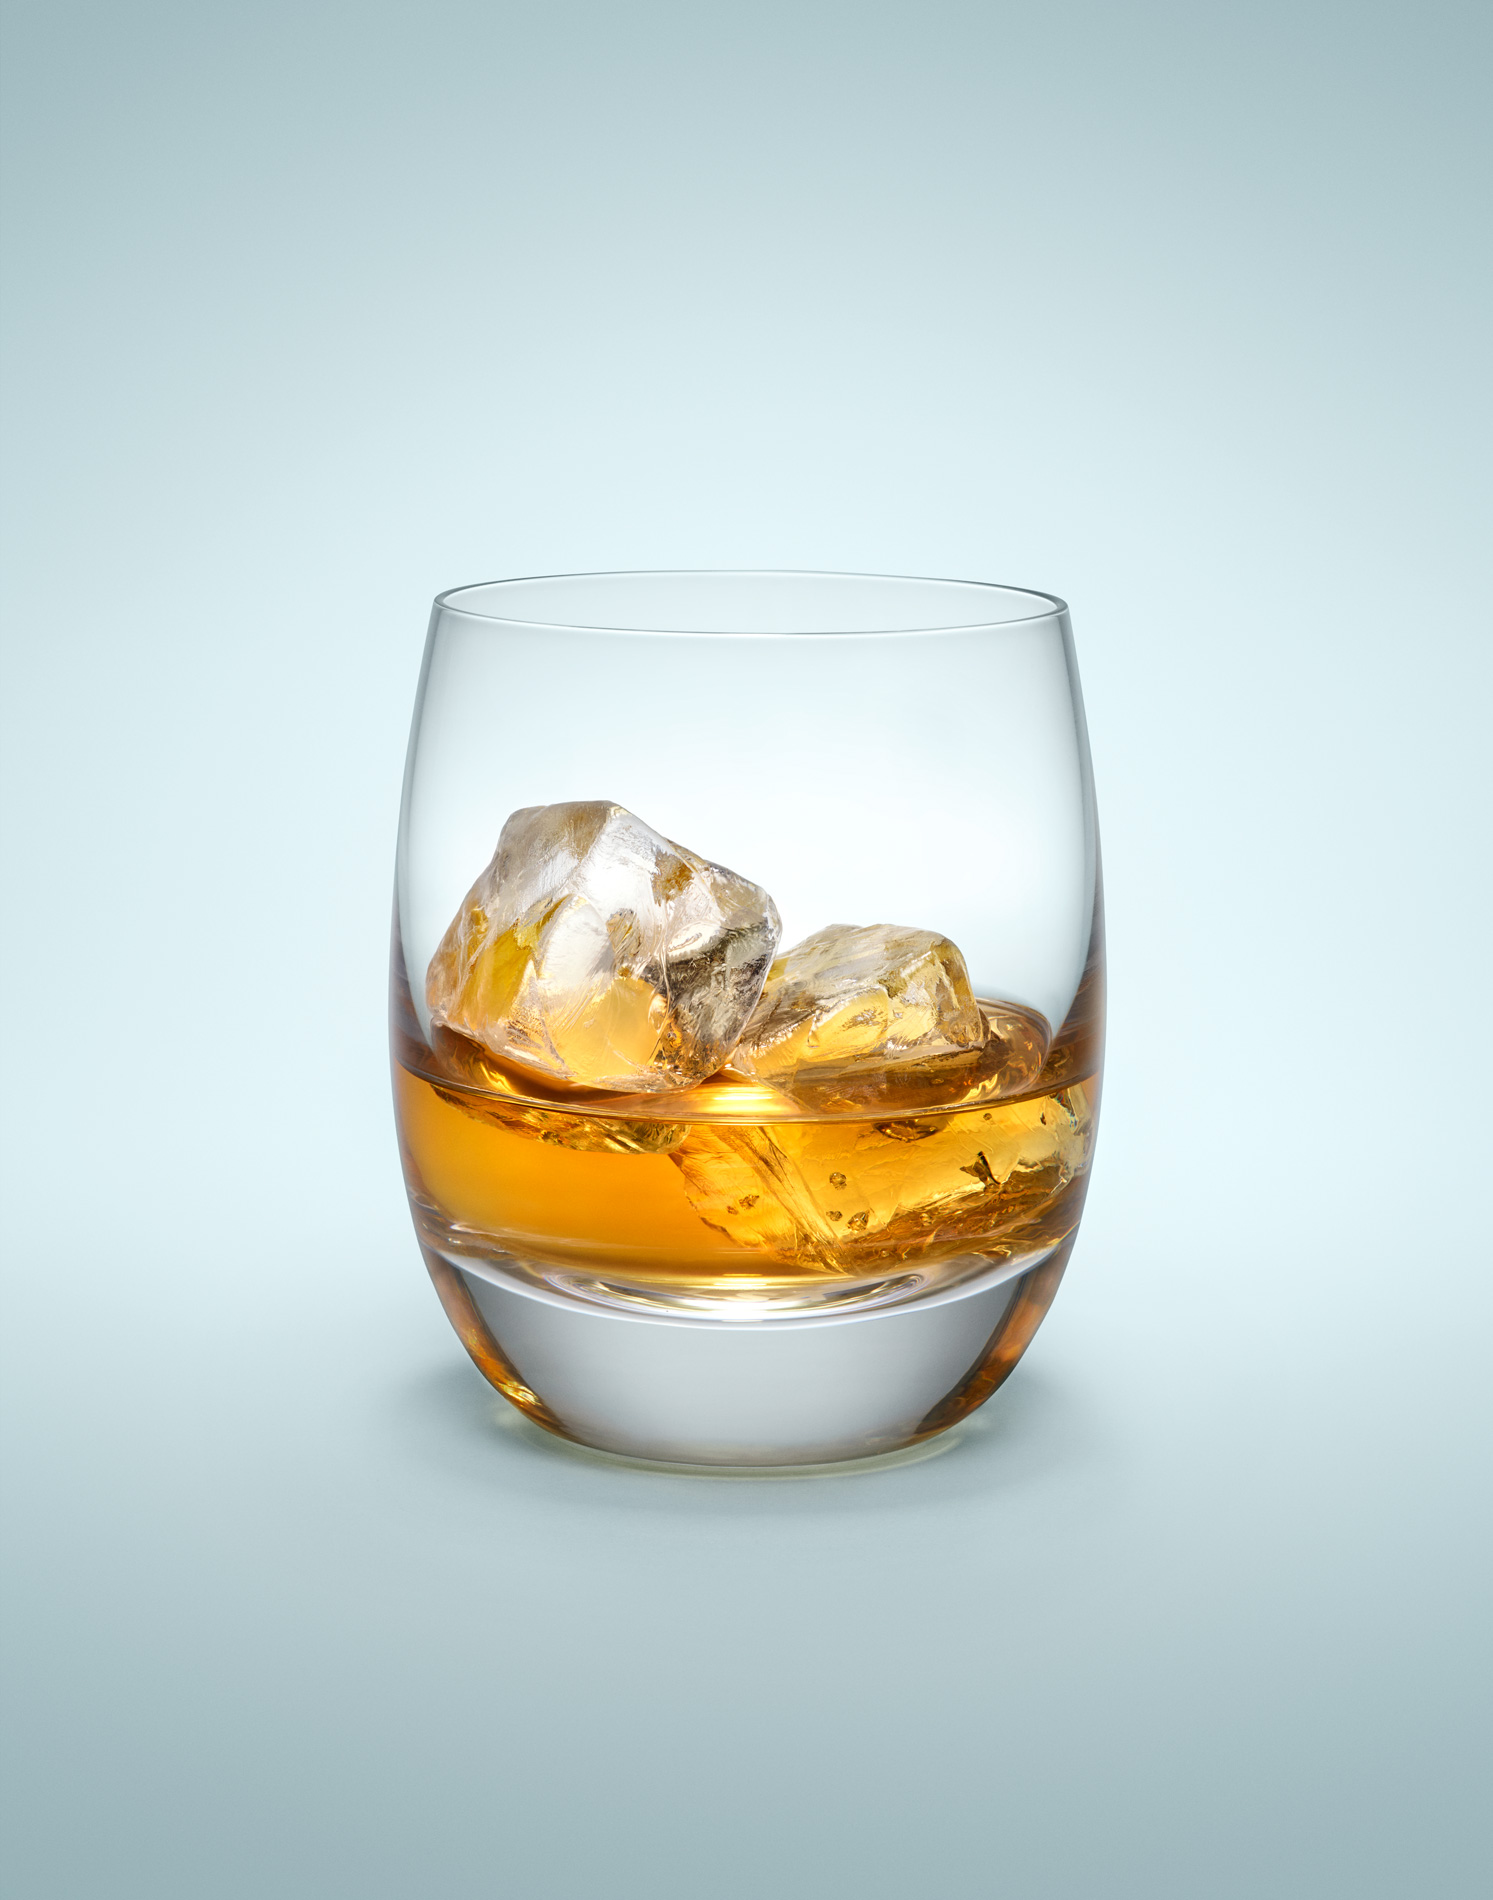 Whiskey photography by Alexander Kent London based still life and product photographer.